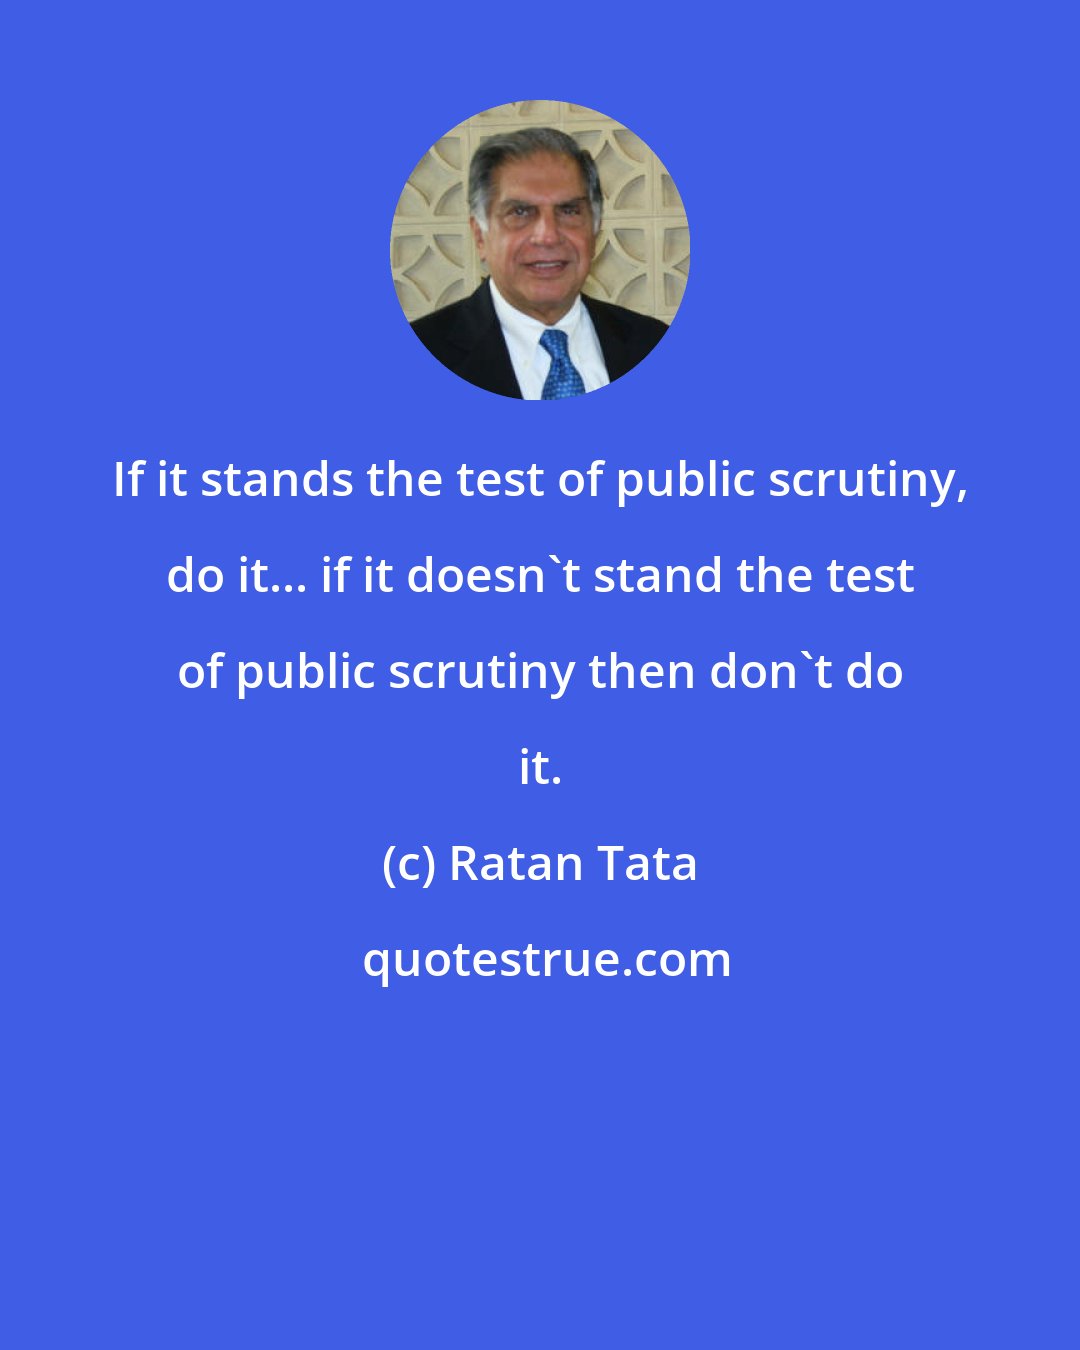 Ratan Tata: If it stands the test of public scrutiny, do it... if it doesn't stand the test of public scrutiny then don't do it.